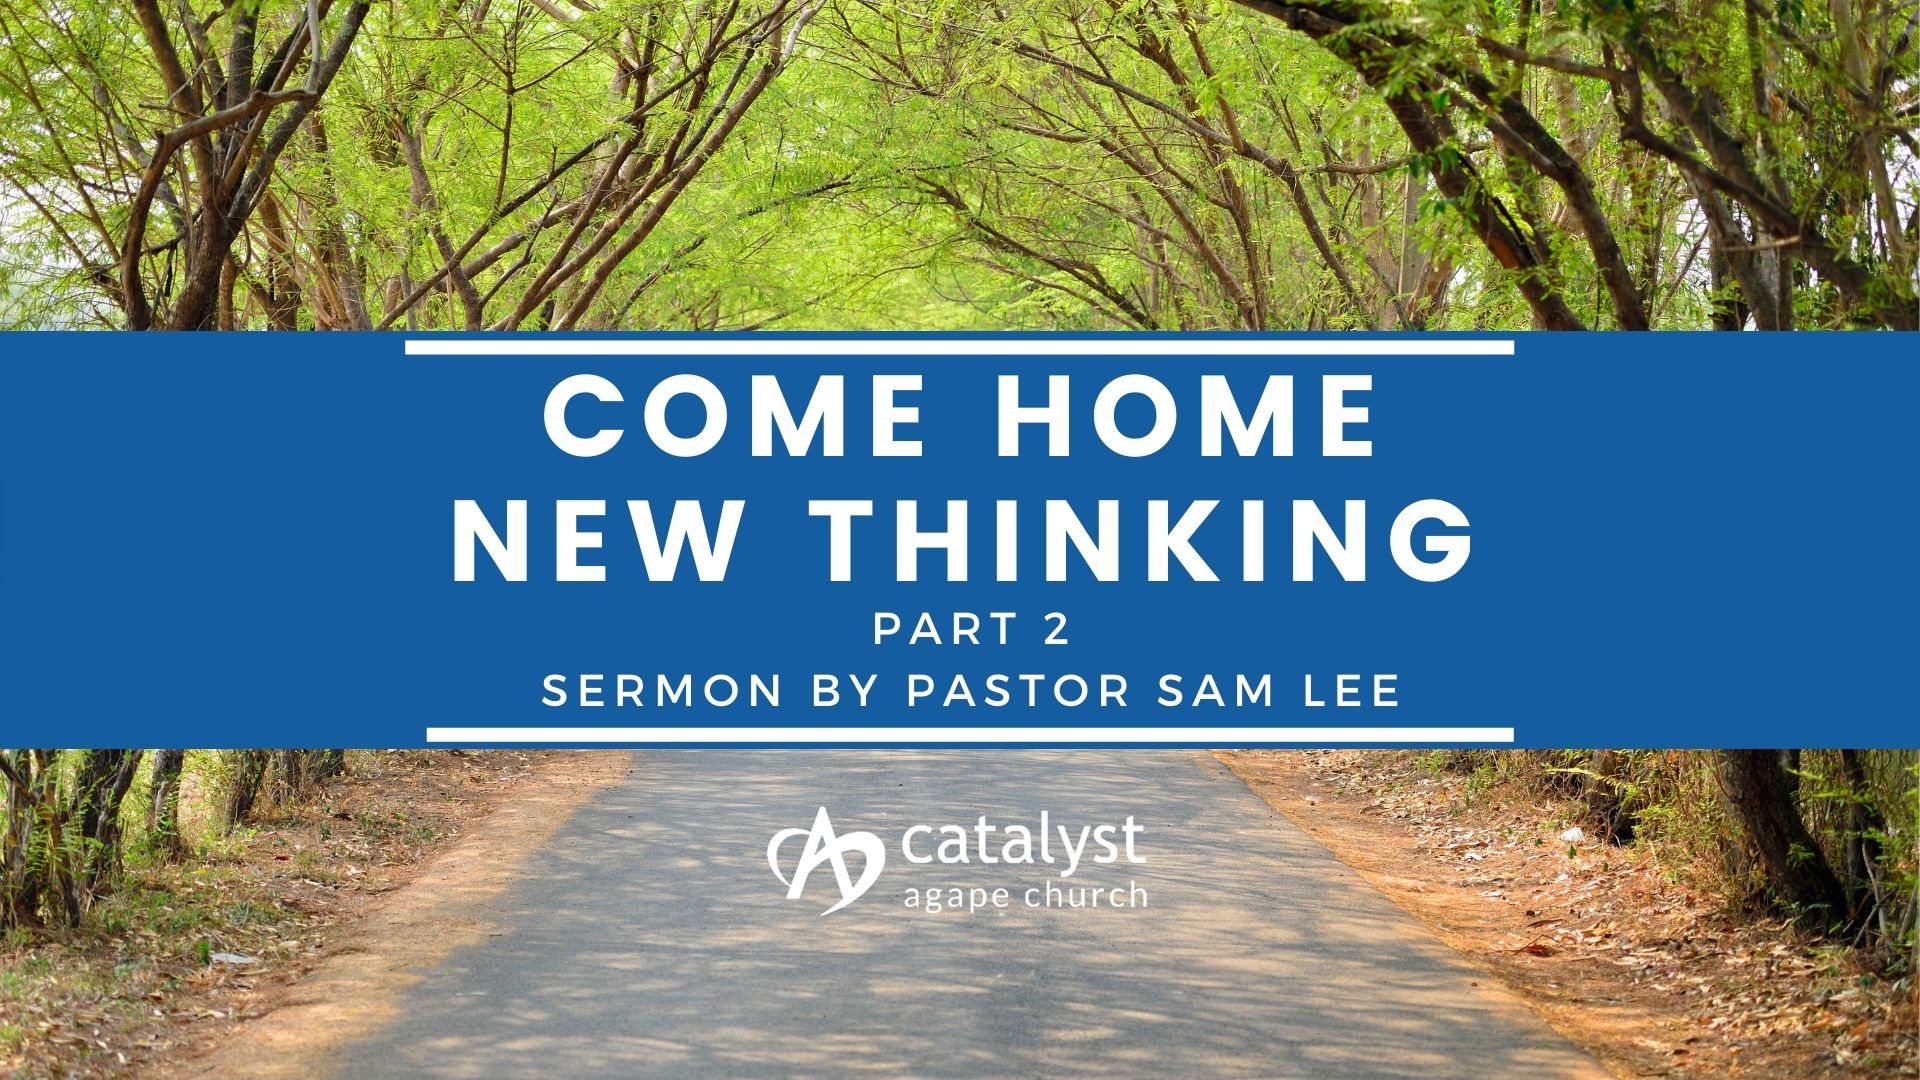 Come Home - New Thinking Part 2